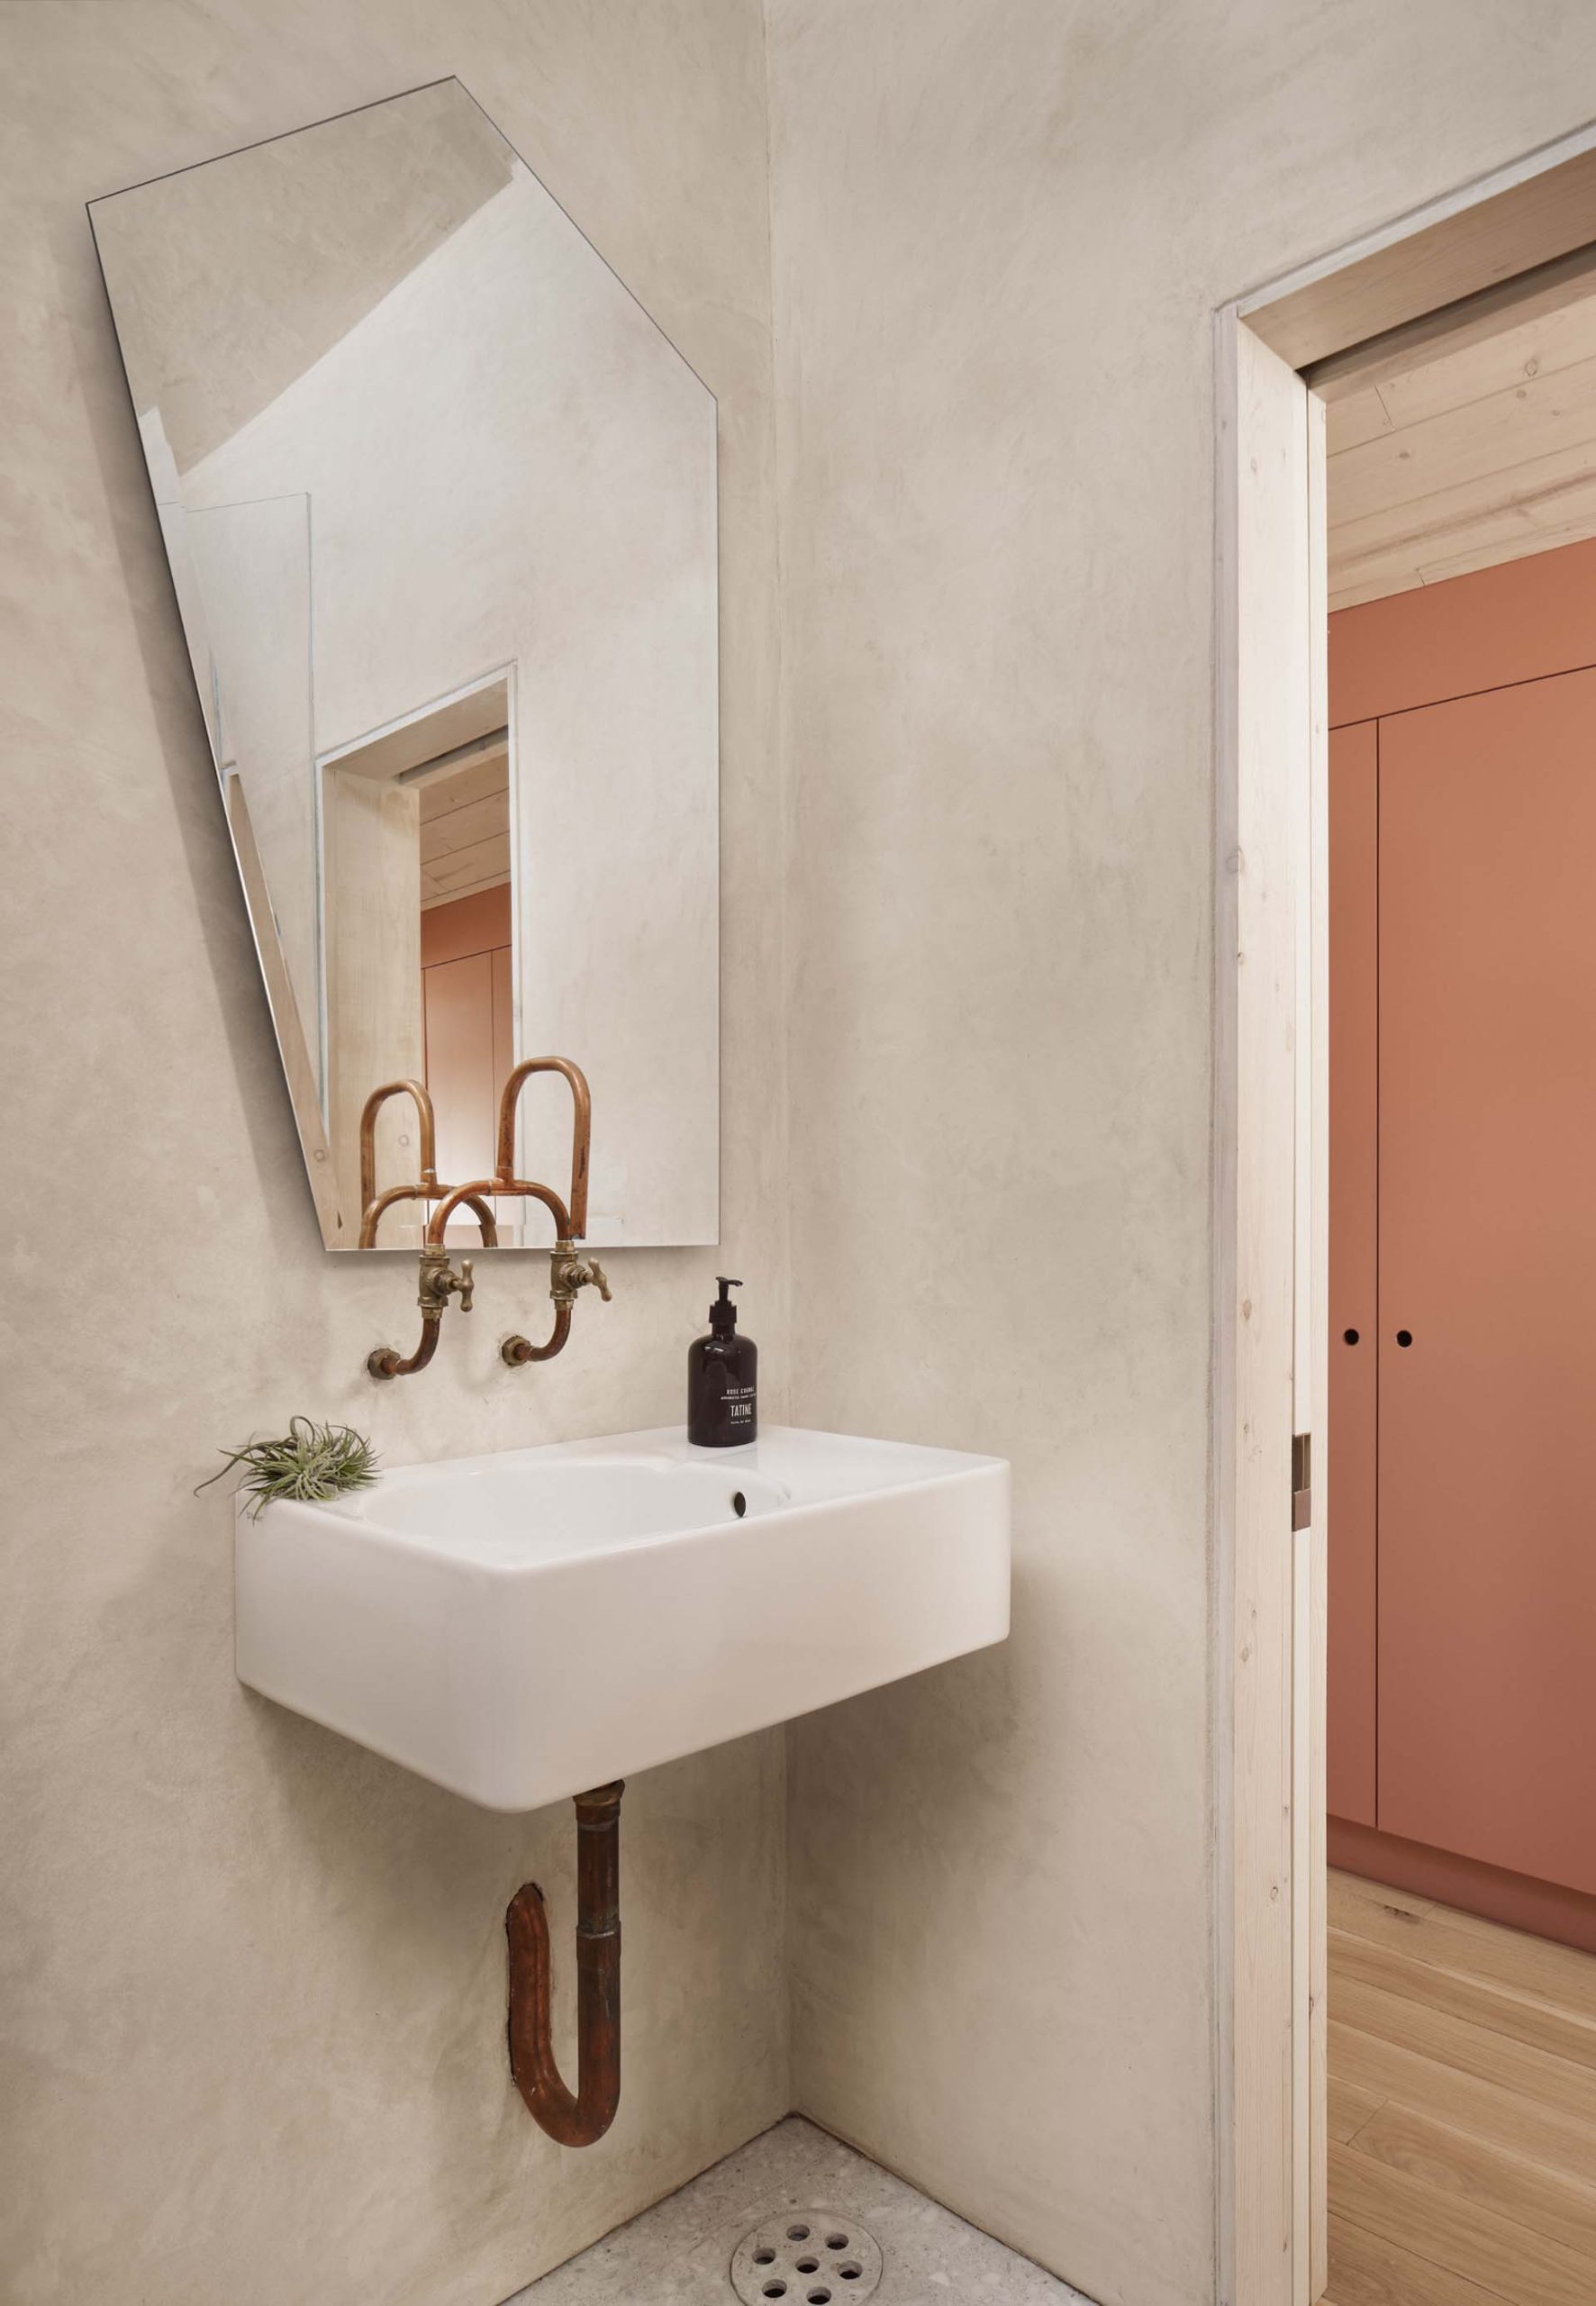 A bathroom includes an angular mirror, a shower with shelving niches, and a skylight.